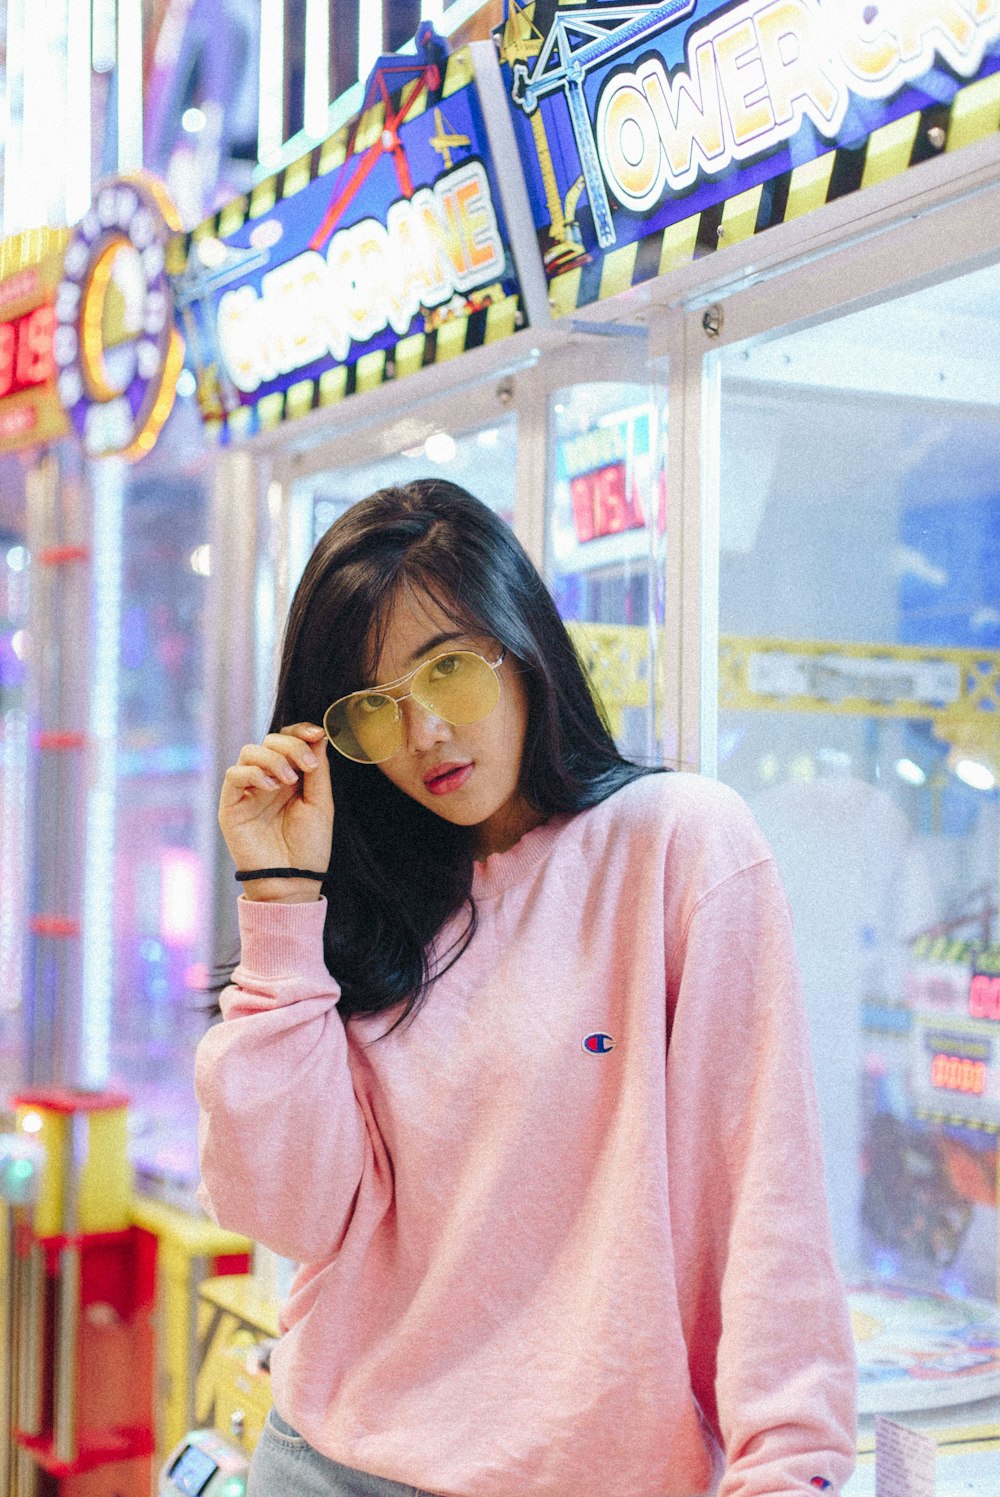 woman in pink Champion sweatshirt holding her sunglasses leaning on game machine